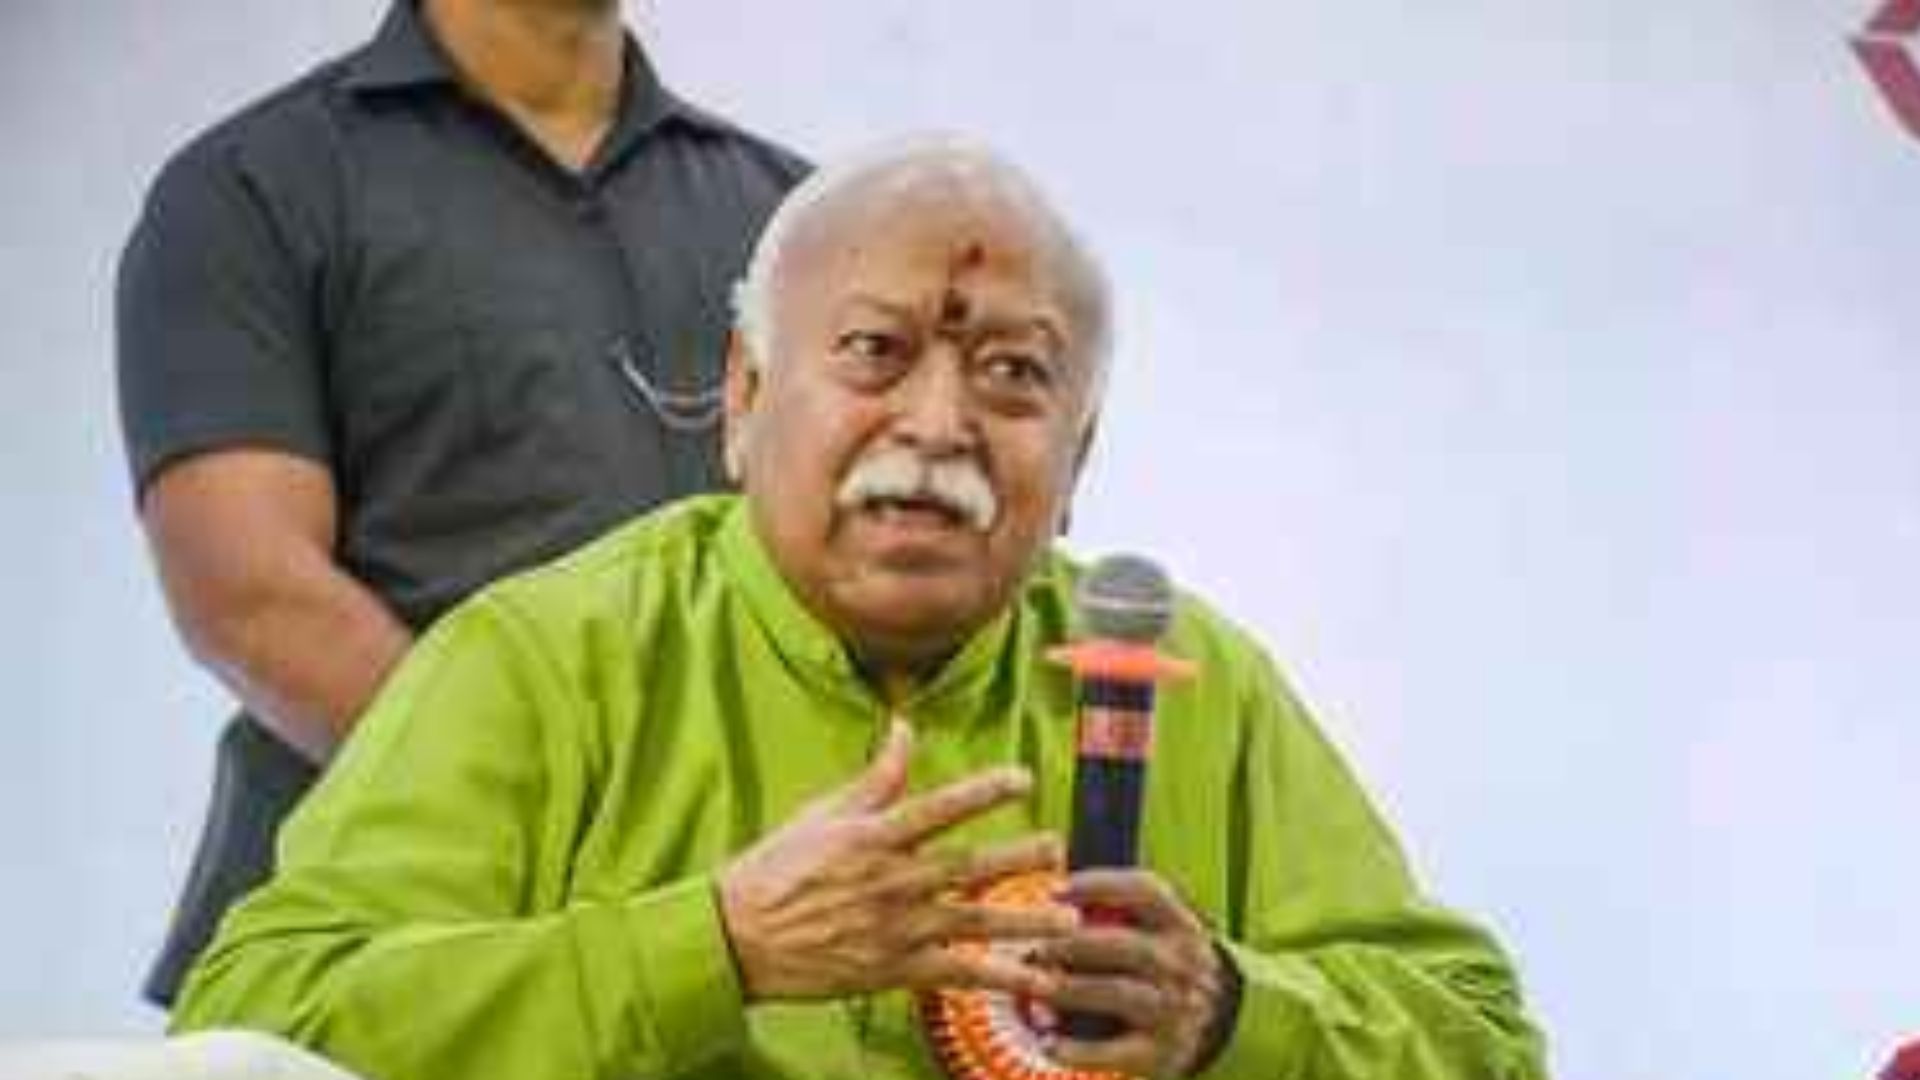 All Sampradayas in Bharat need to be purified to follow discipline, says RSS Chief Mohan Bhagwat